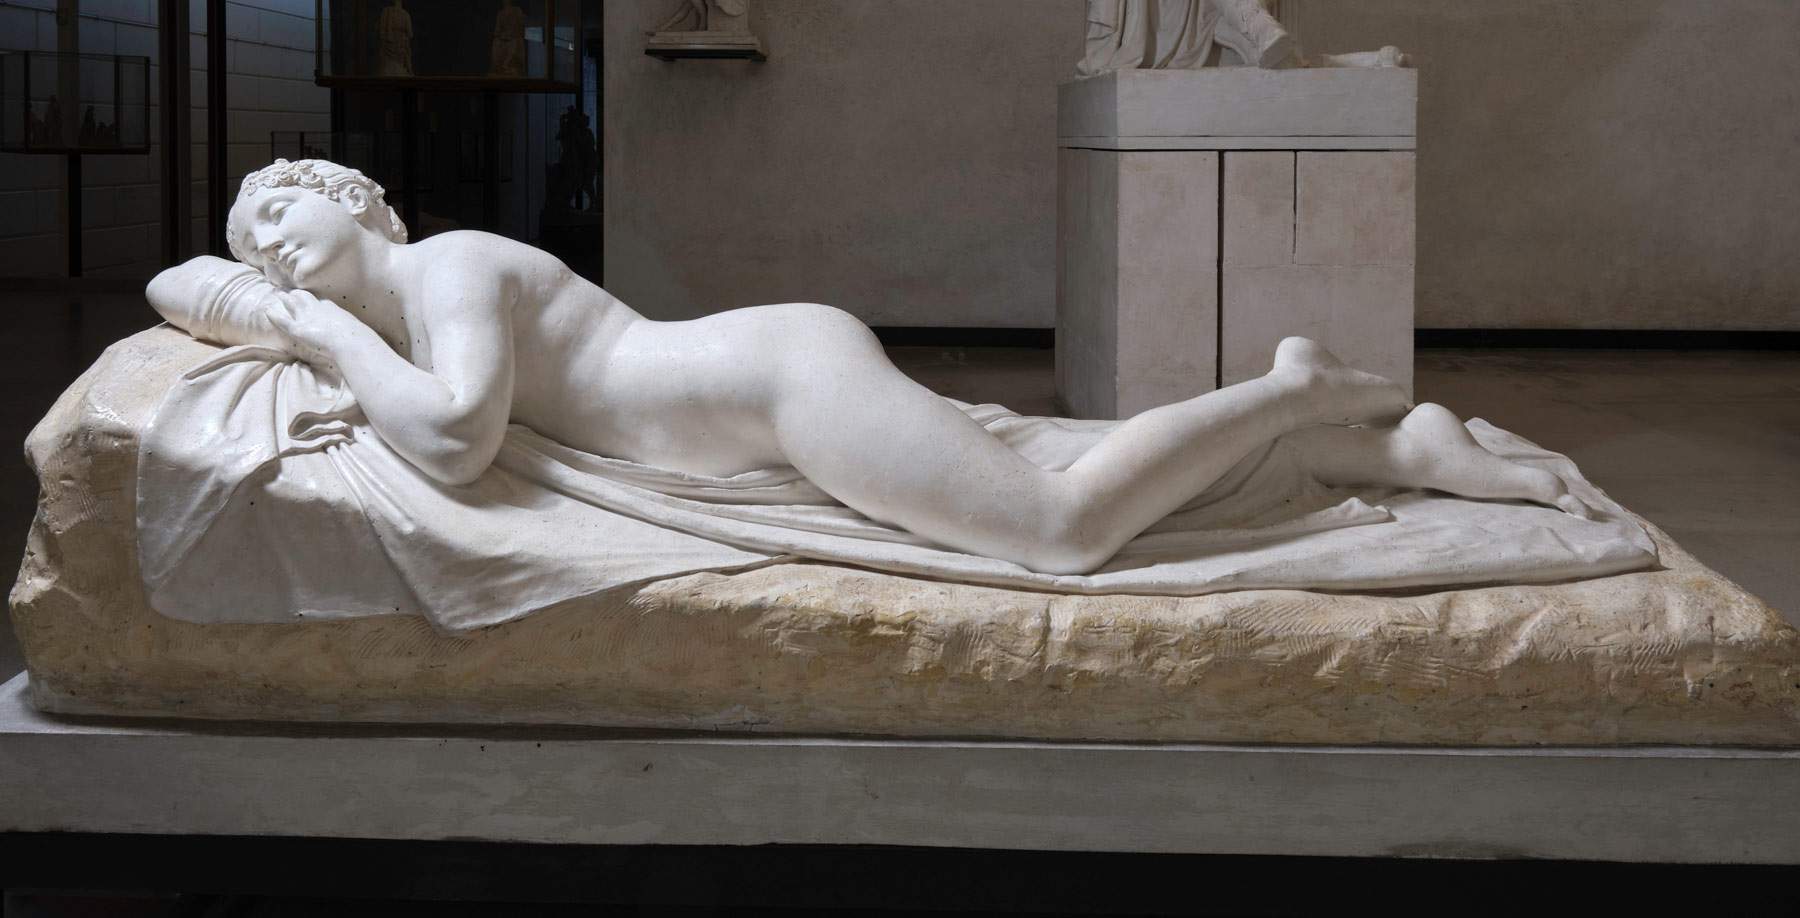 Mart in Rovereto hosts major exhibition on Canova and his legacy